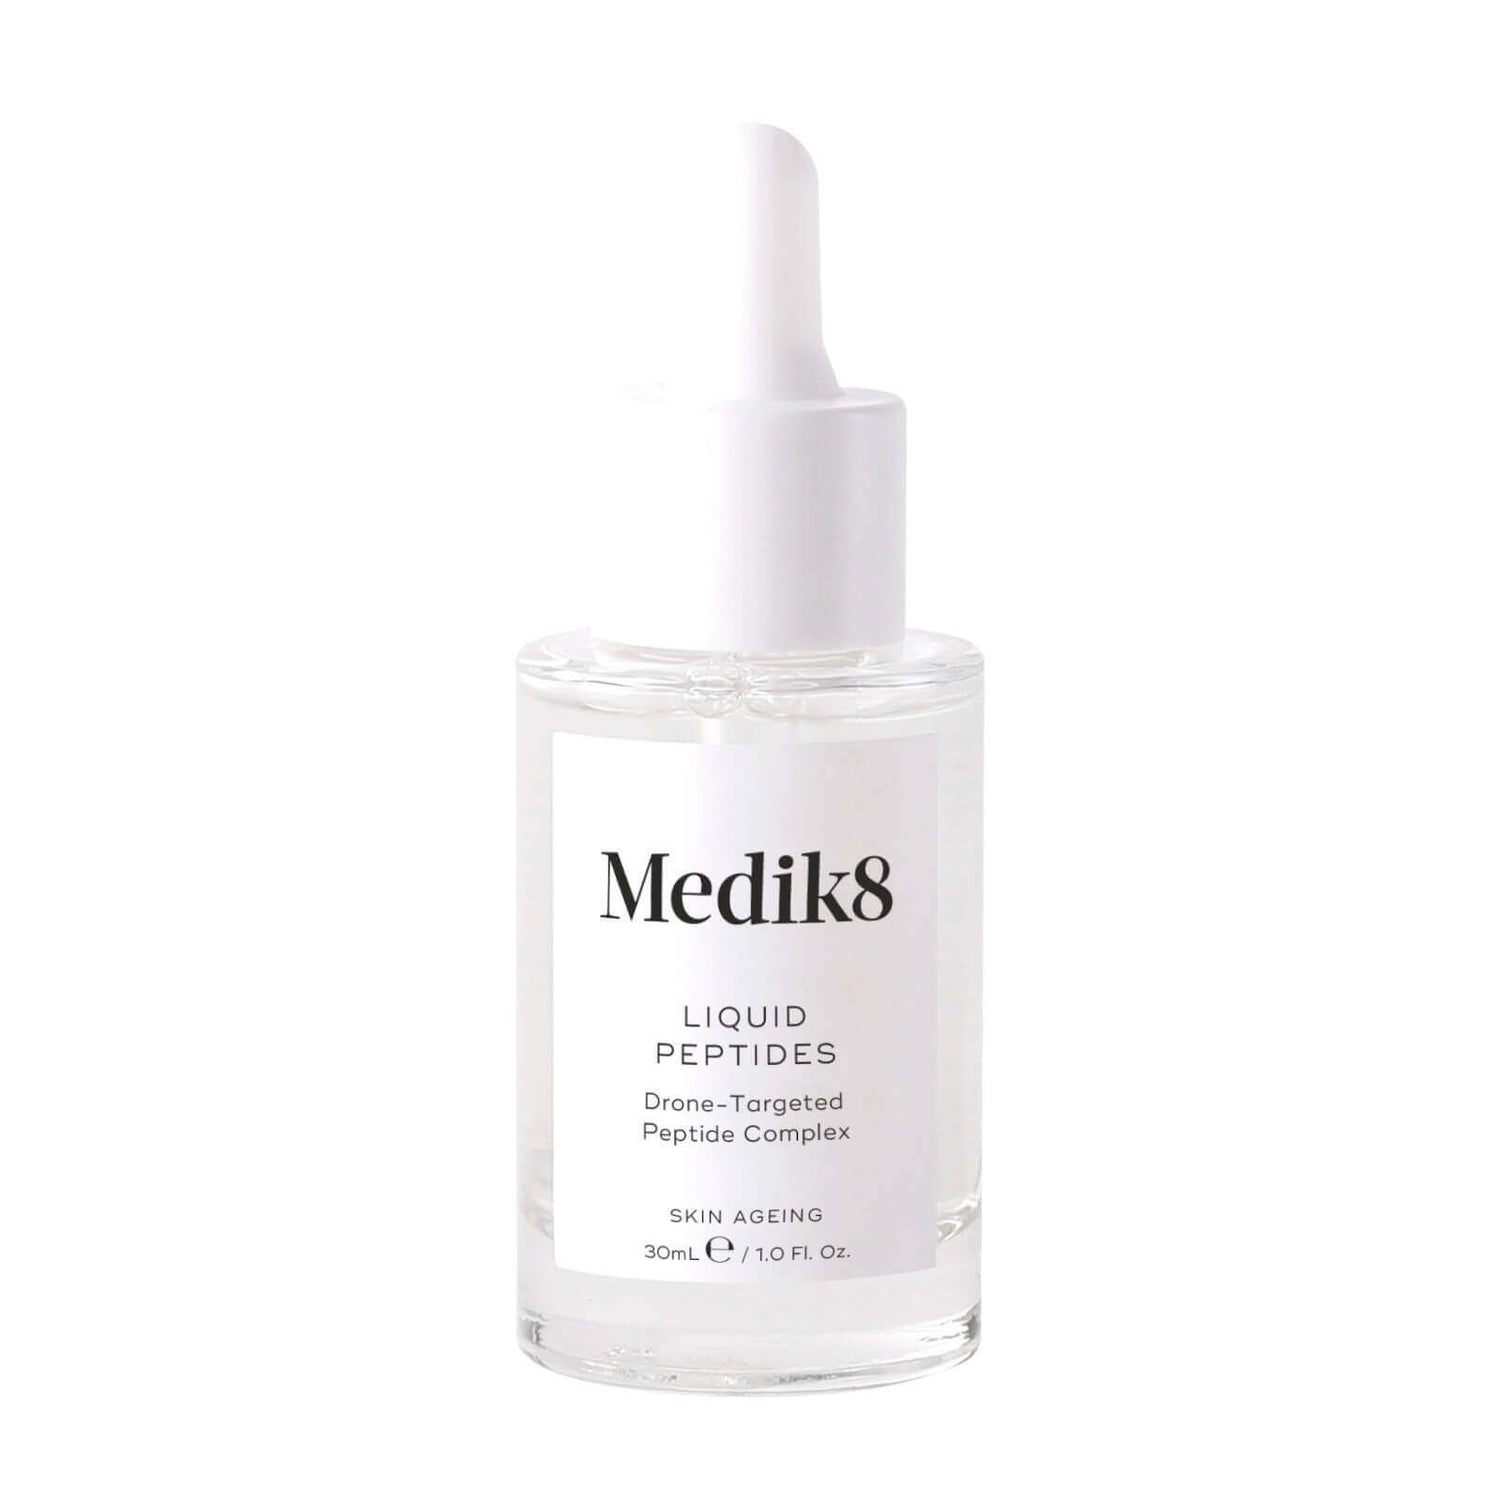 Medik8 MEMEDIK8 Liquid Peptides 30ml: Unlock the power of peptides with MEDIK8 Liquid Peptides, a potent anti-aging serum formulated to promote firmness, smoothness, and youthful-looking skin for a revitalised and radiant complexion.